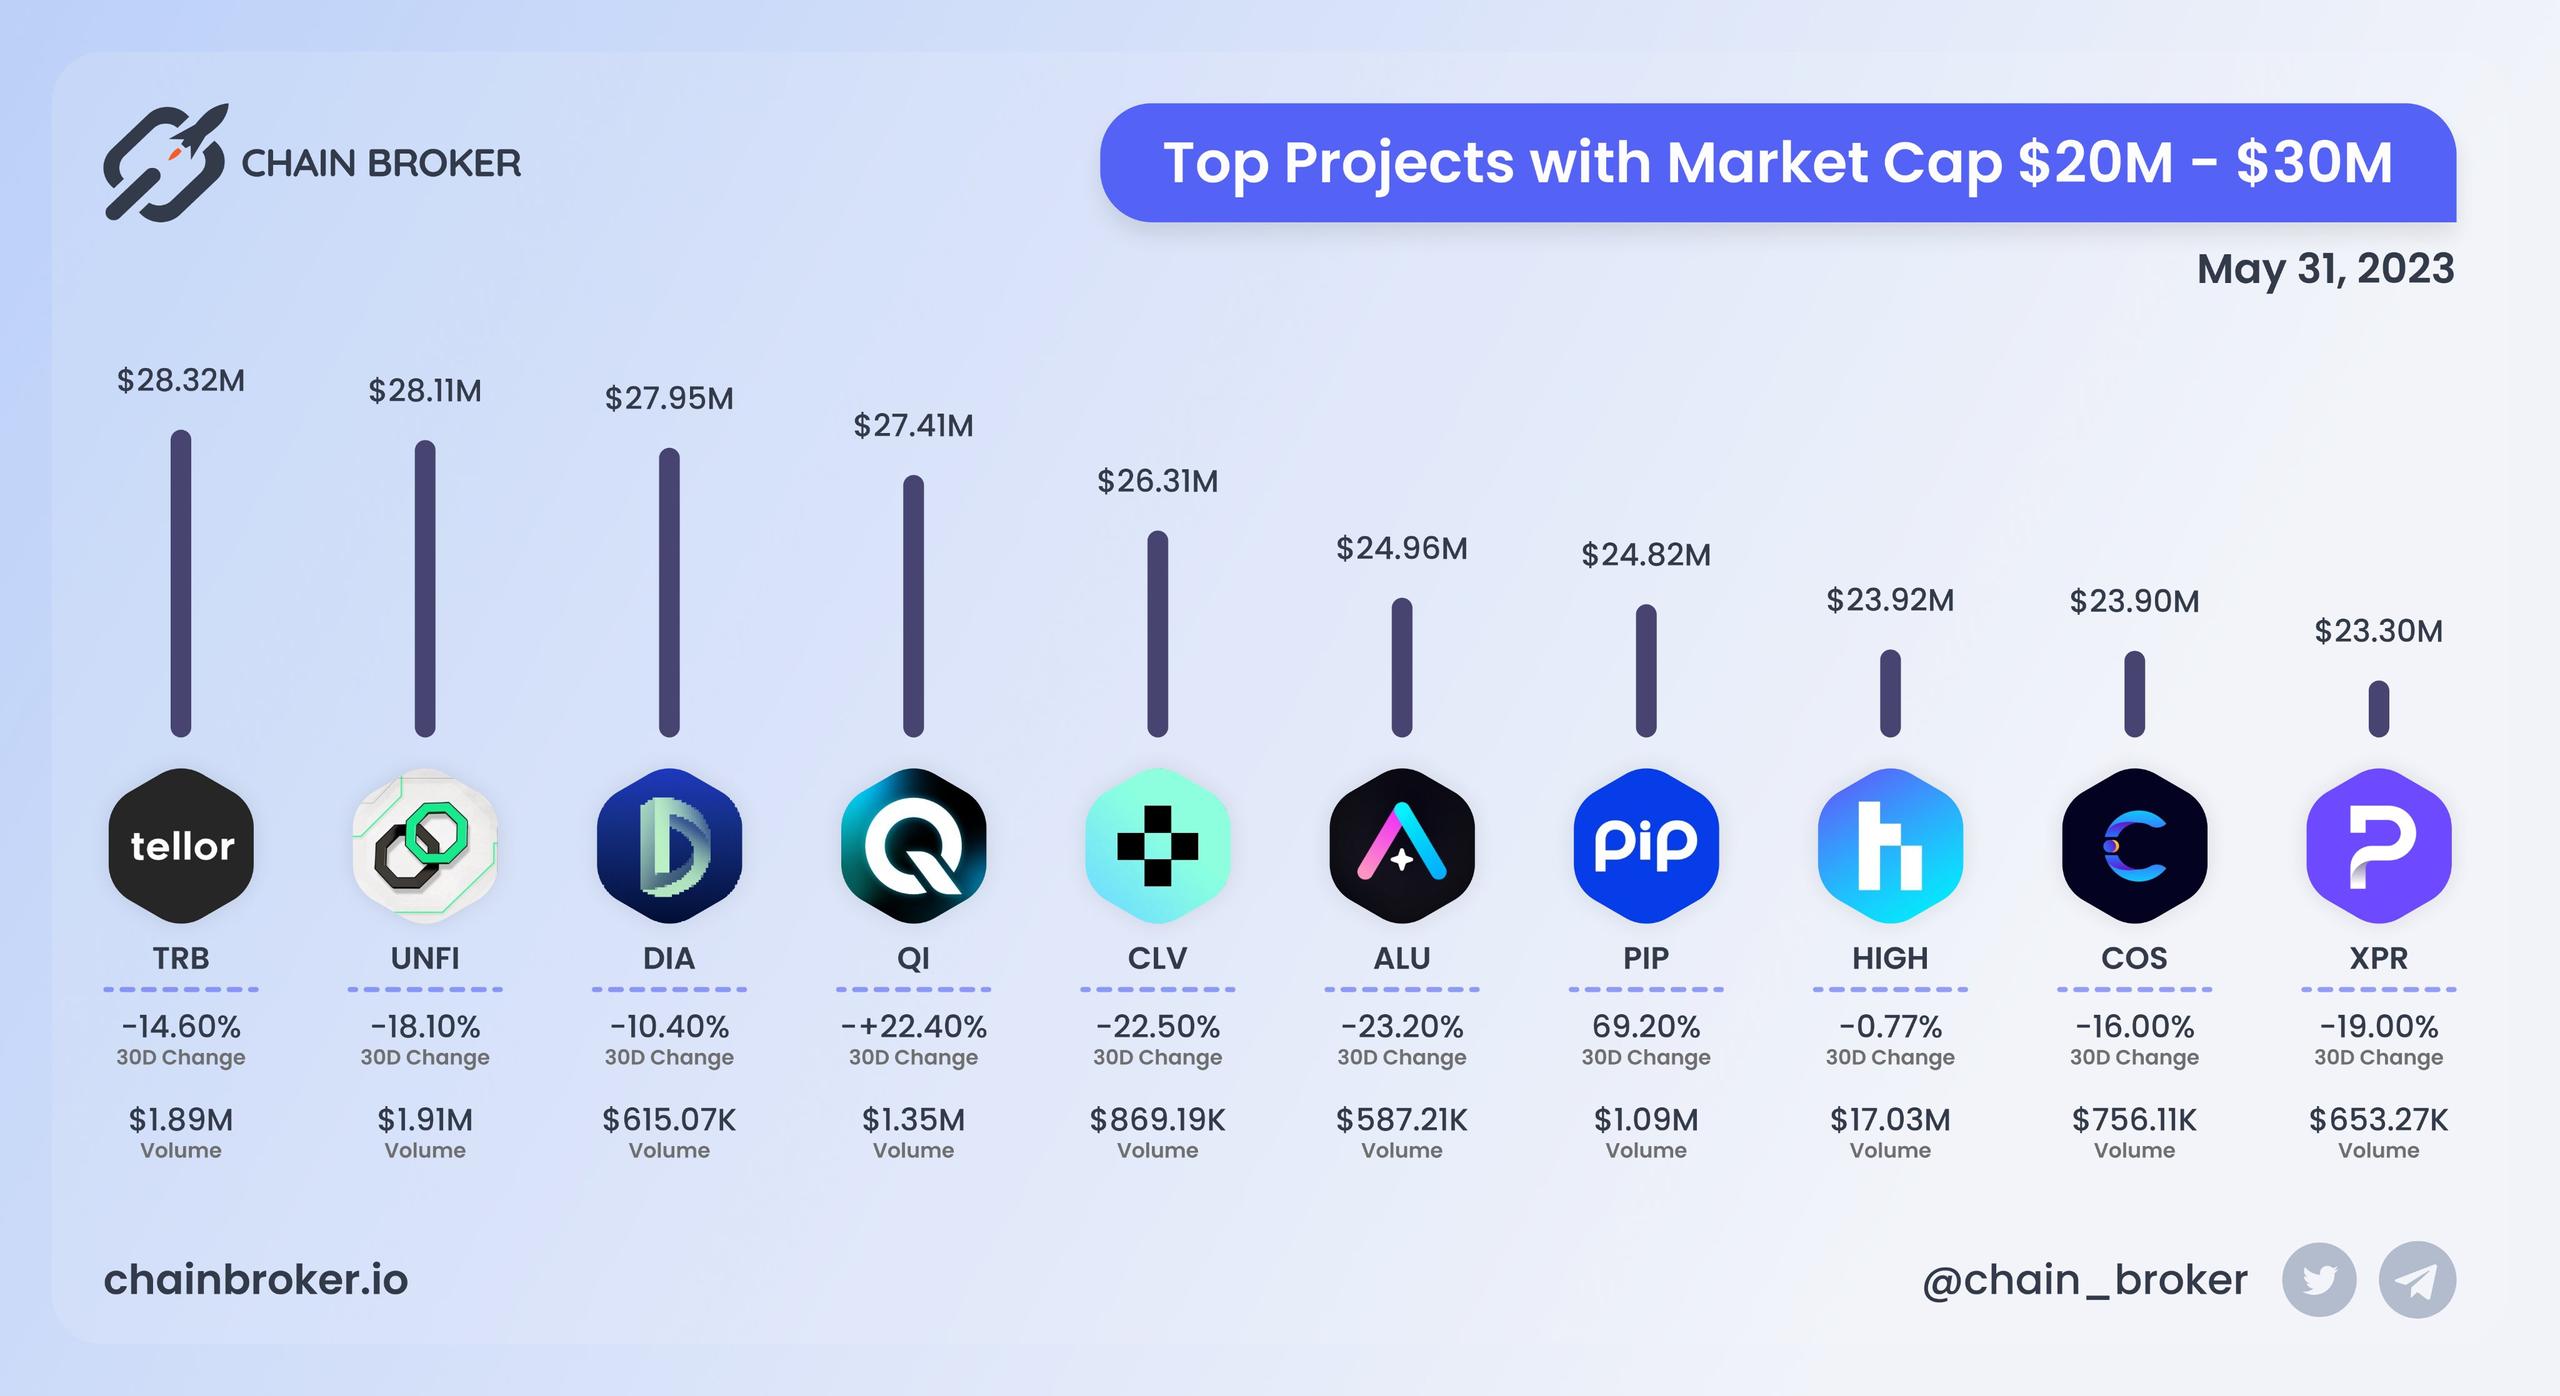 Top projects with Market Cap $20M - $30M